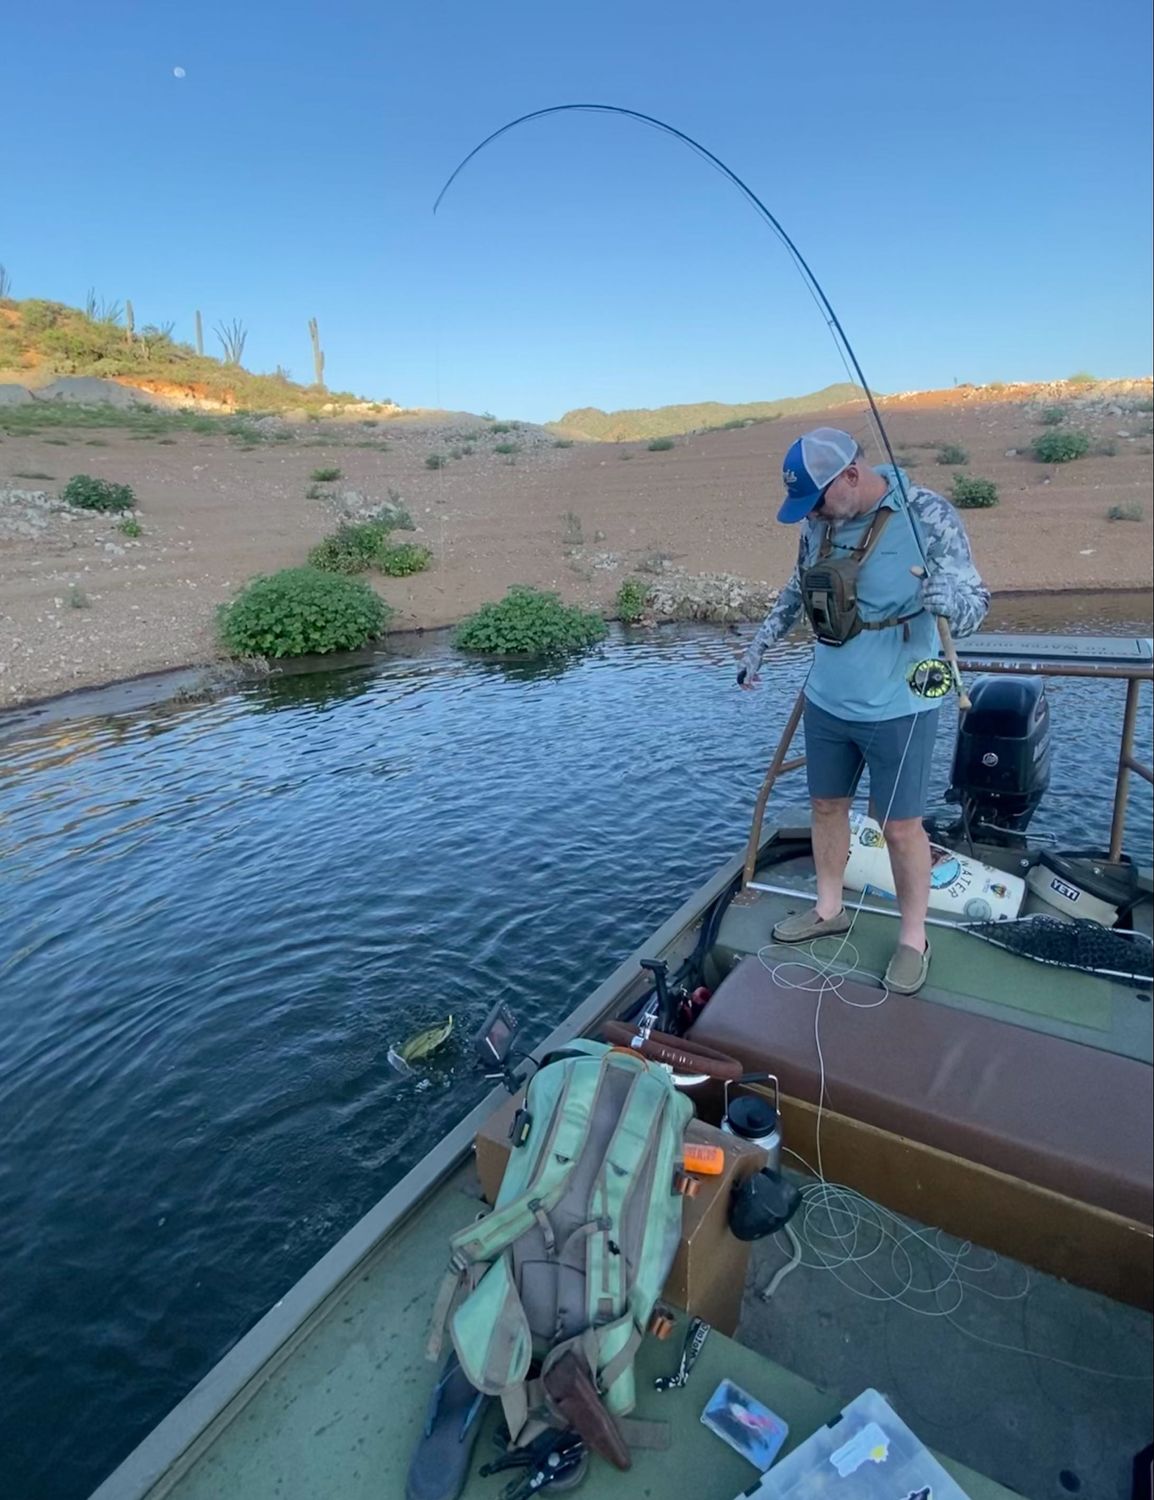 Can I fly fish in any state?